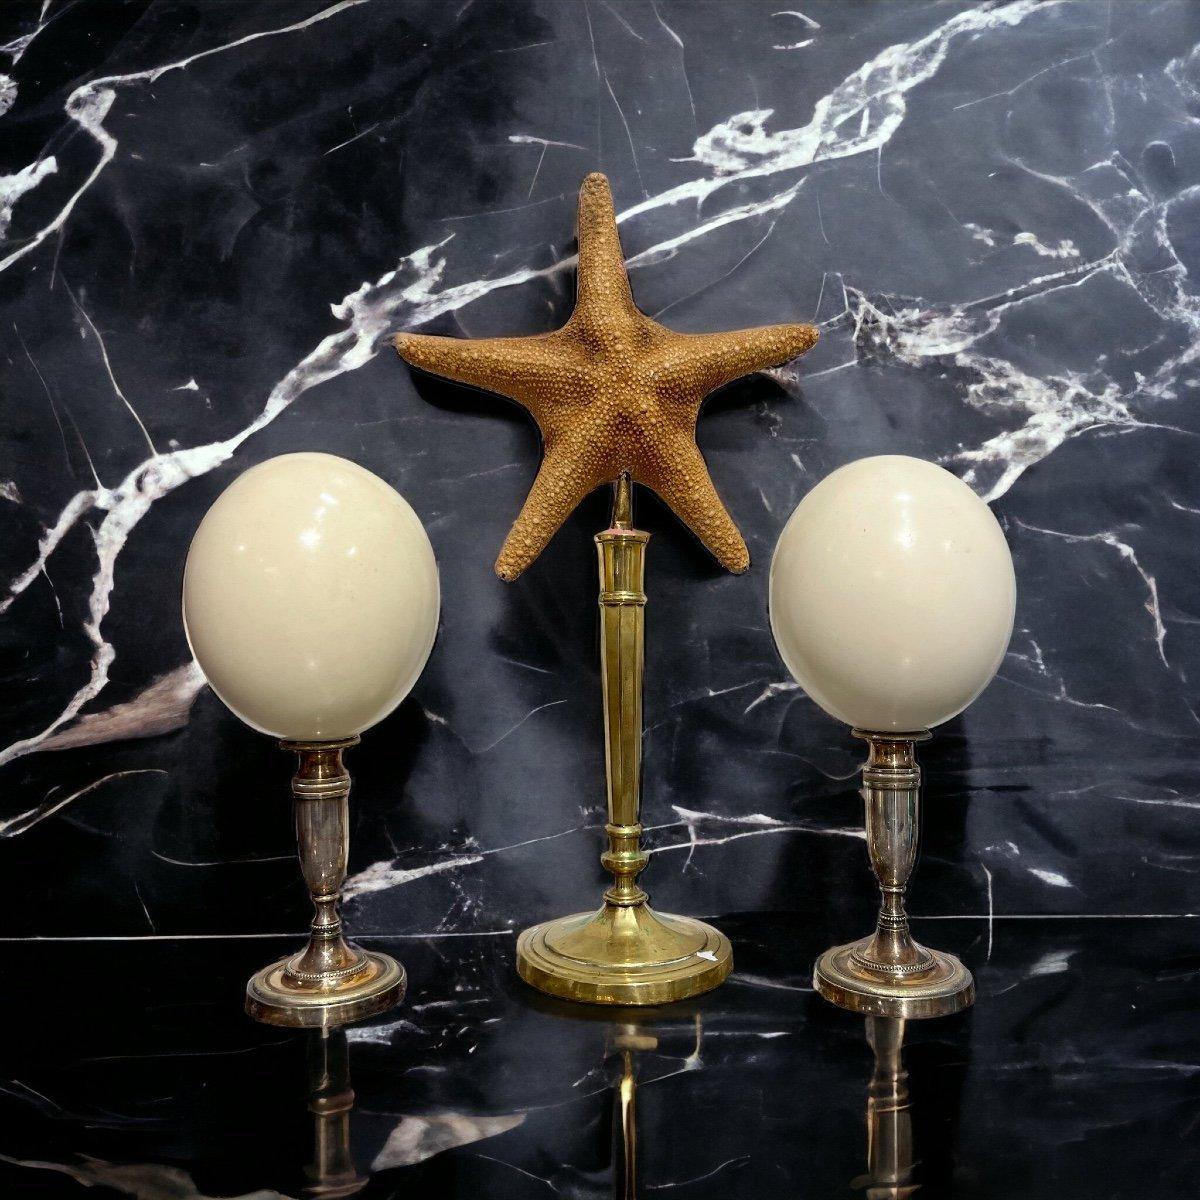 We present you this pair of highly decorative curiosity items featuring ostrich eggs measuring 27 cm in height and 12 cm in diameter each.

Hailing from the Napoleon III period in the 19th century, this wonderful pair would fit just as well in a